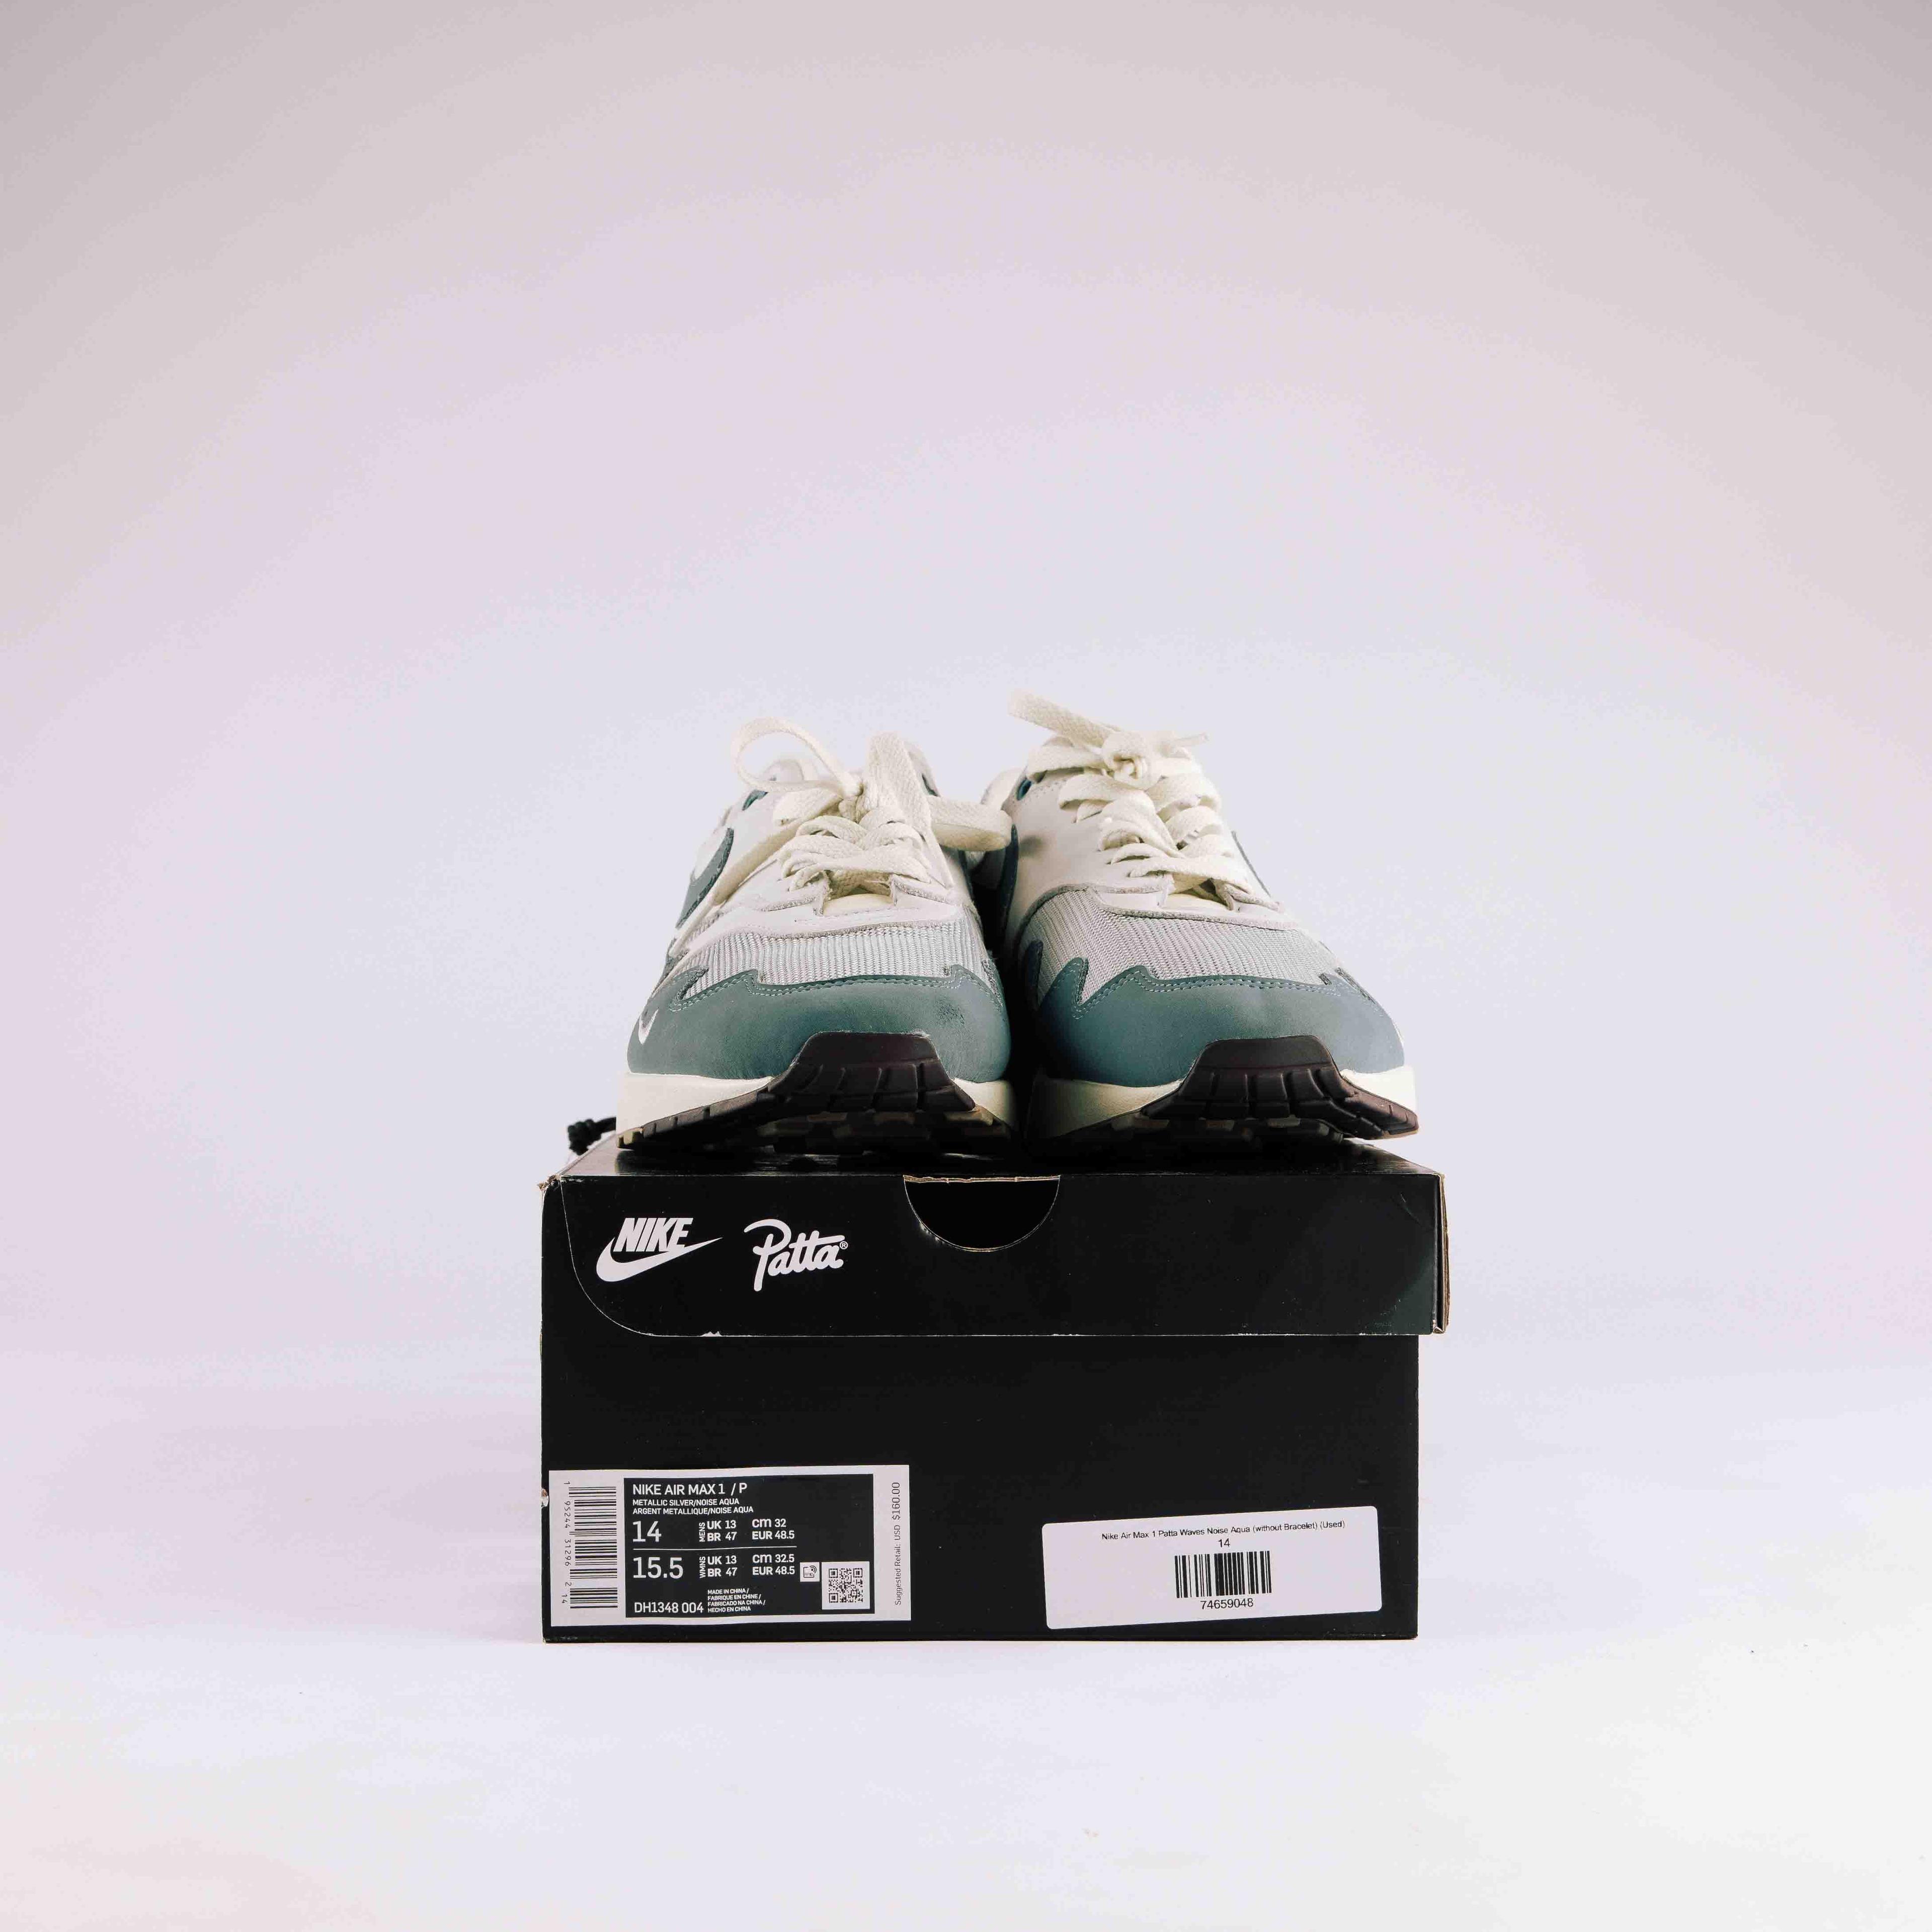 Alternate View 2 of Nike Air Max 1 Patta Waves Noise Aqua (without Bracelet) (Used)